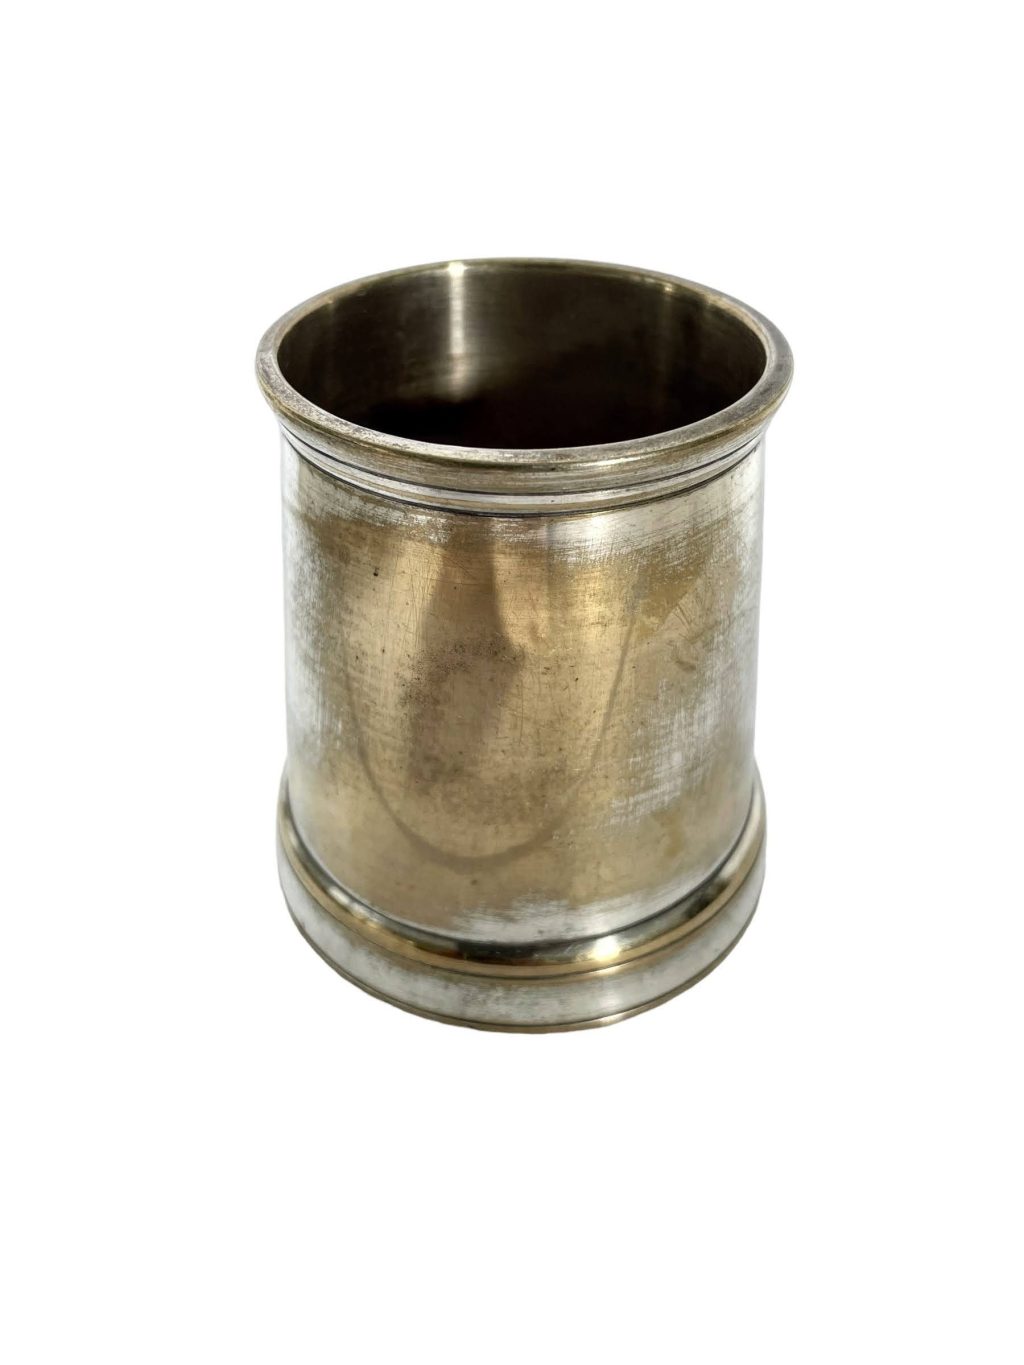 Antique English Small Silver Metal EPNS Silver Goblet Cup Beaker Pot Desk Container Display Drinking circa 1910-20’s